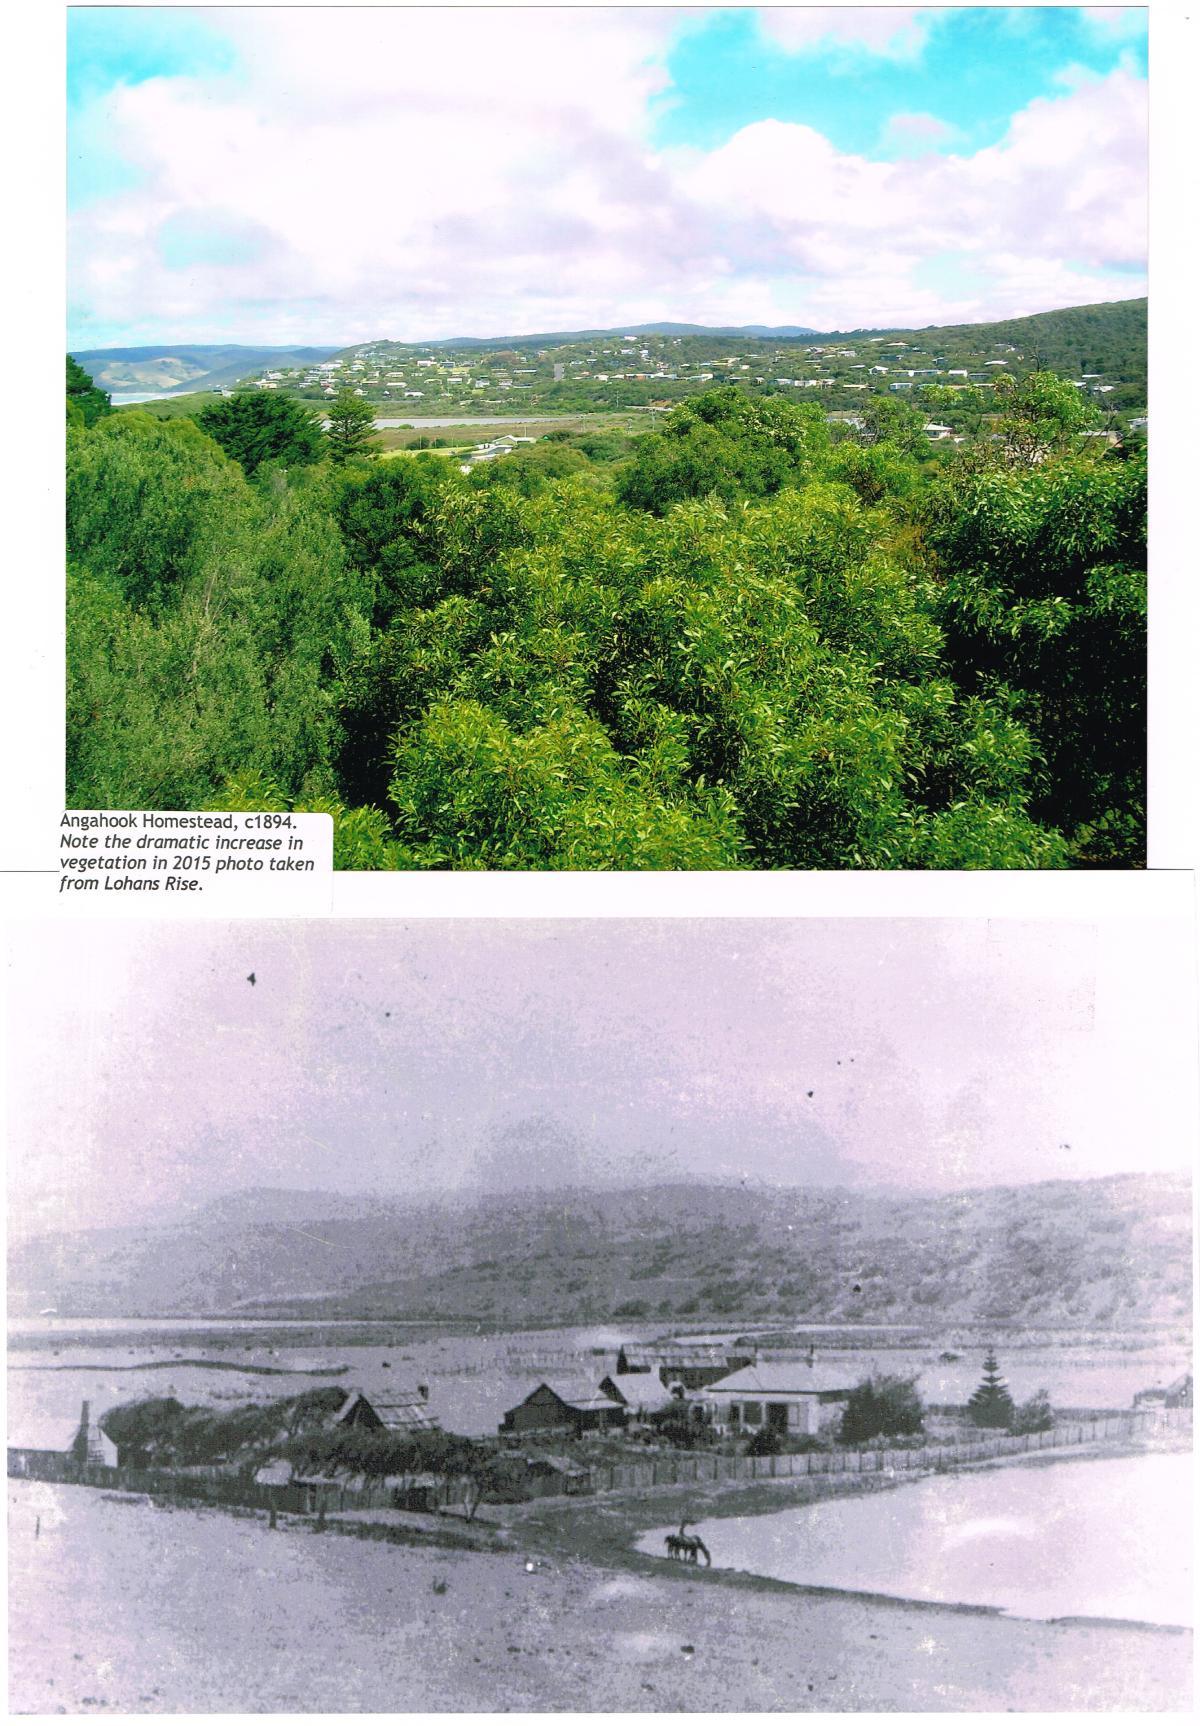 View from Lighthouse - 1910 and now